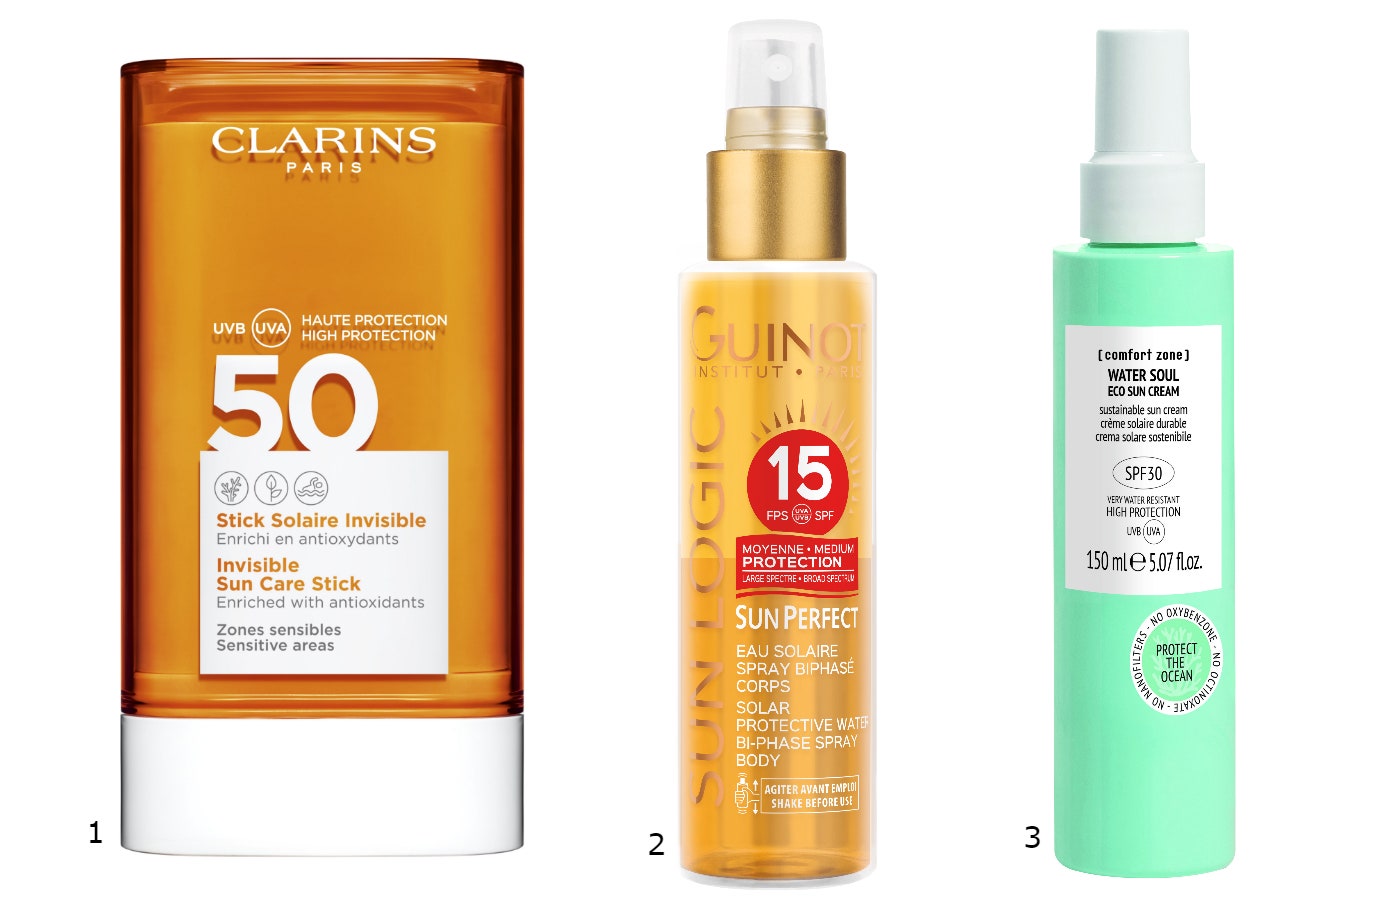 1.Clarins Stick Solaire Invisible SPF 50 2.Guinot Eau Solaire Spray Biphase Corps SPF 15 3.  comfort zone  Water Soul SPF 30